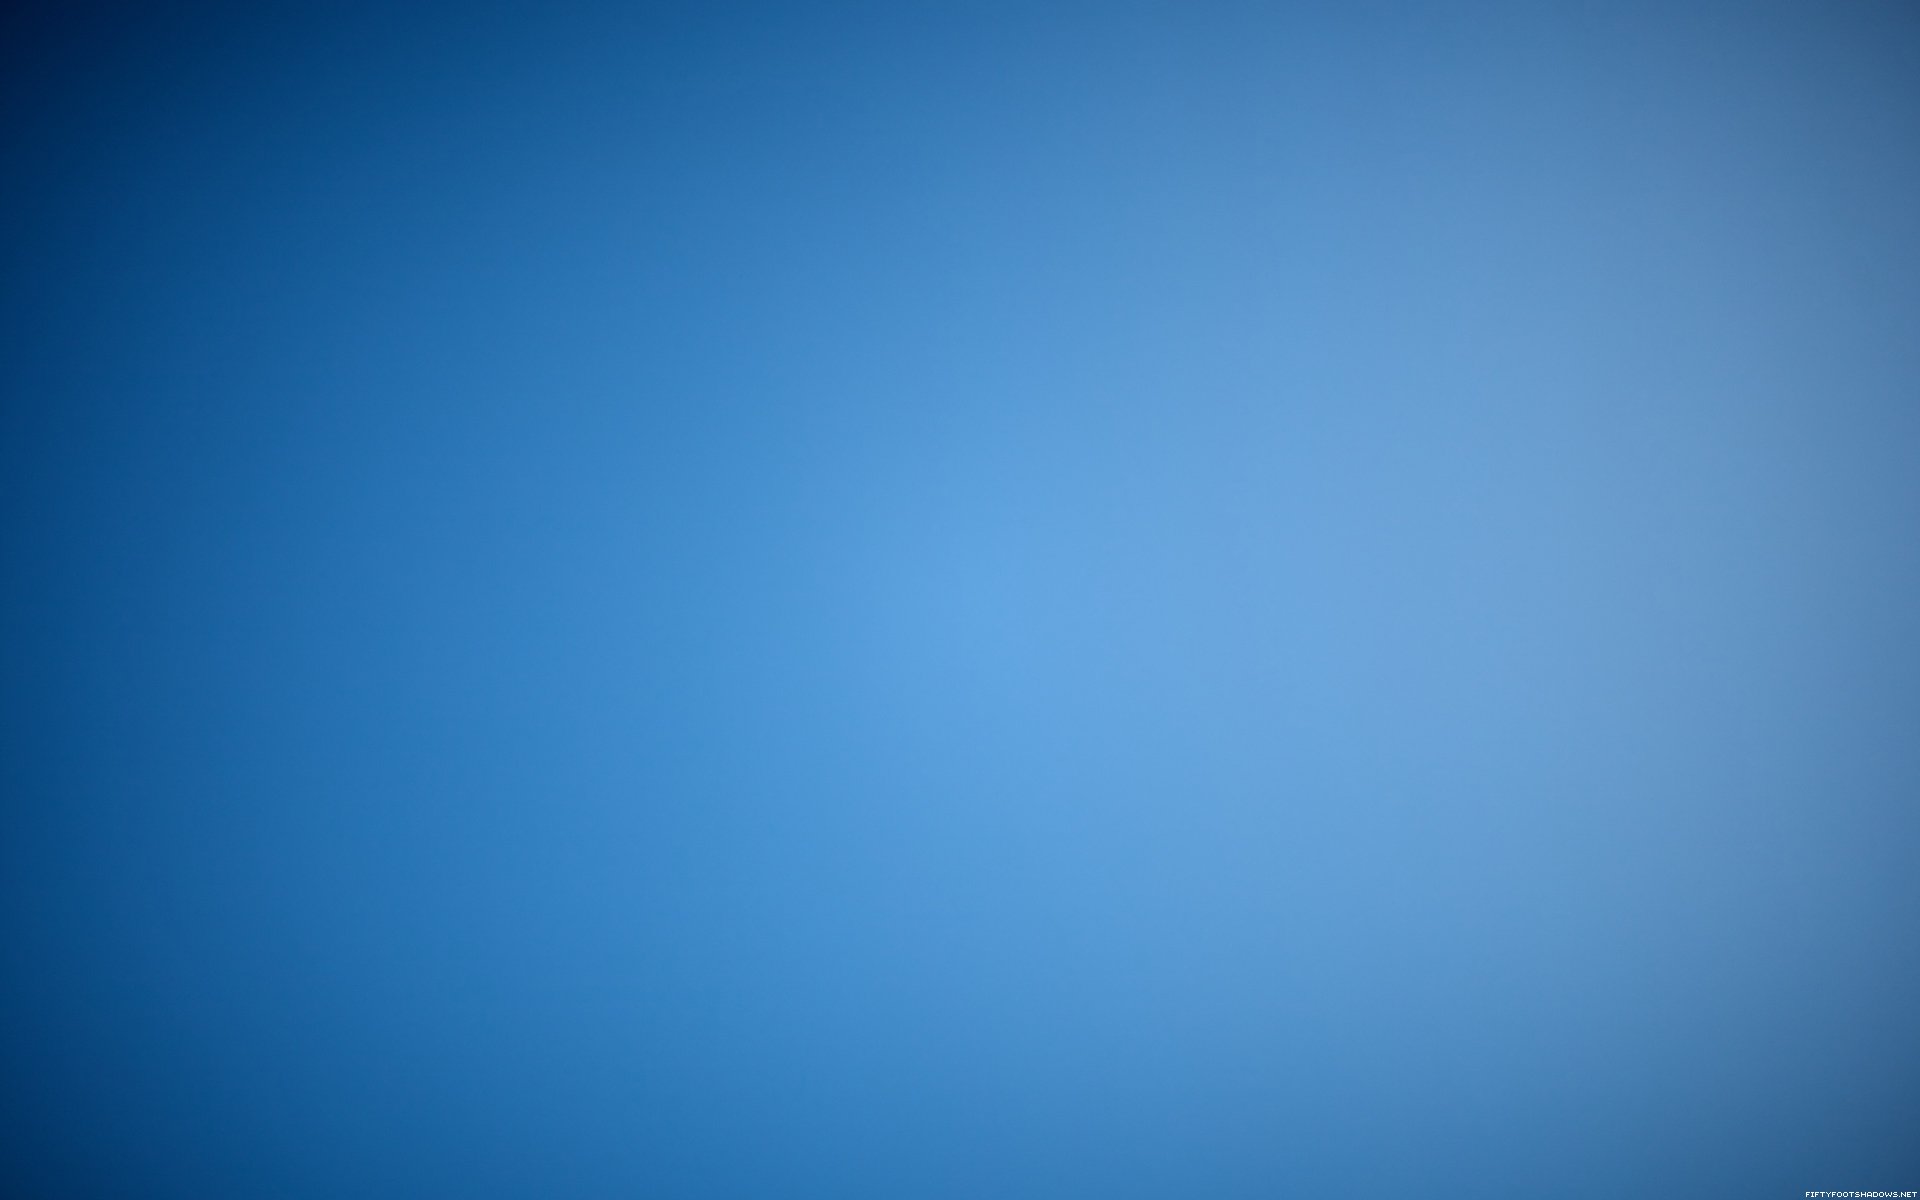 blue shade gradient one color glass HD Wallpaper   General 630620 1920x1200